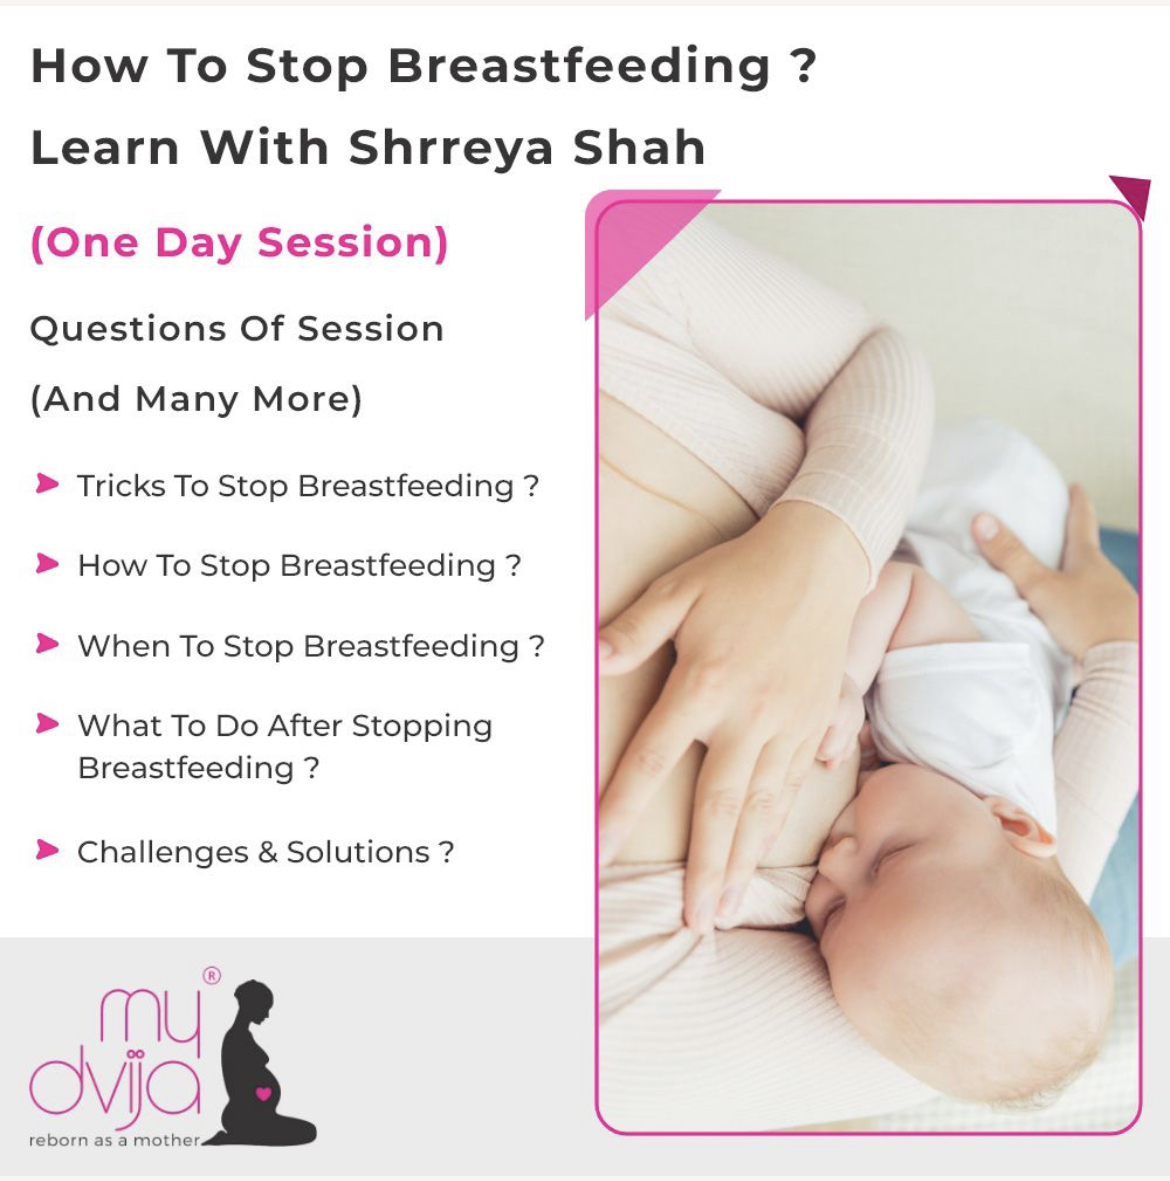 Stopping Breasfeeding Tips - How to Stop Breasteeding